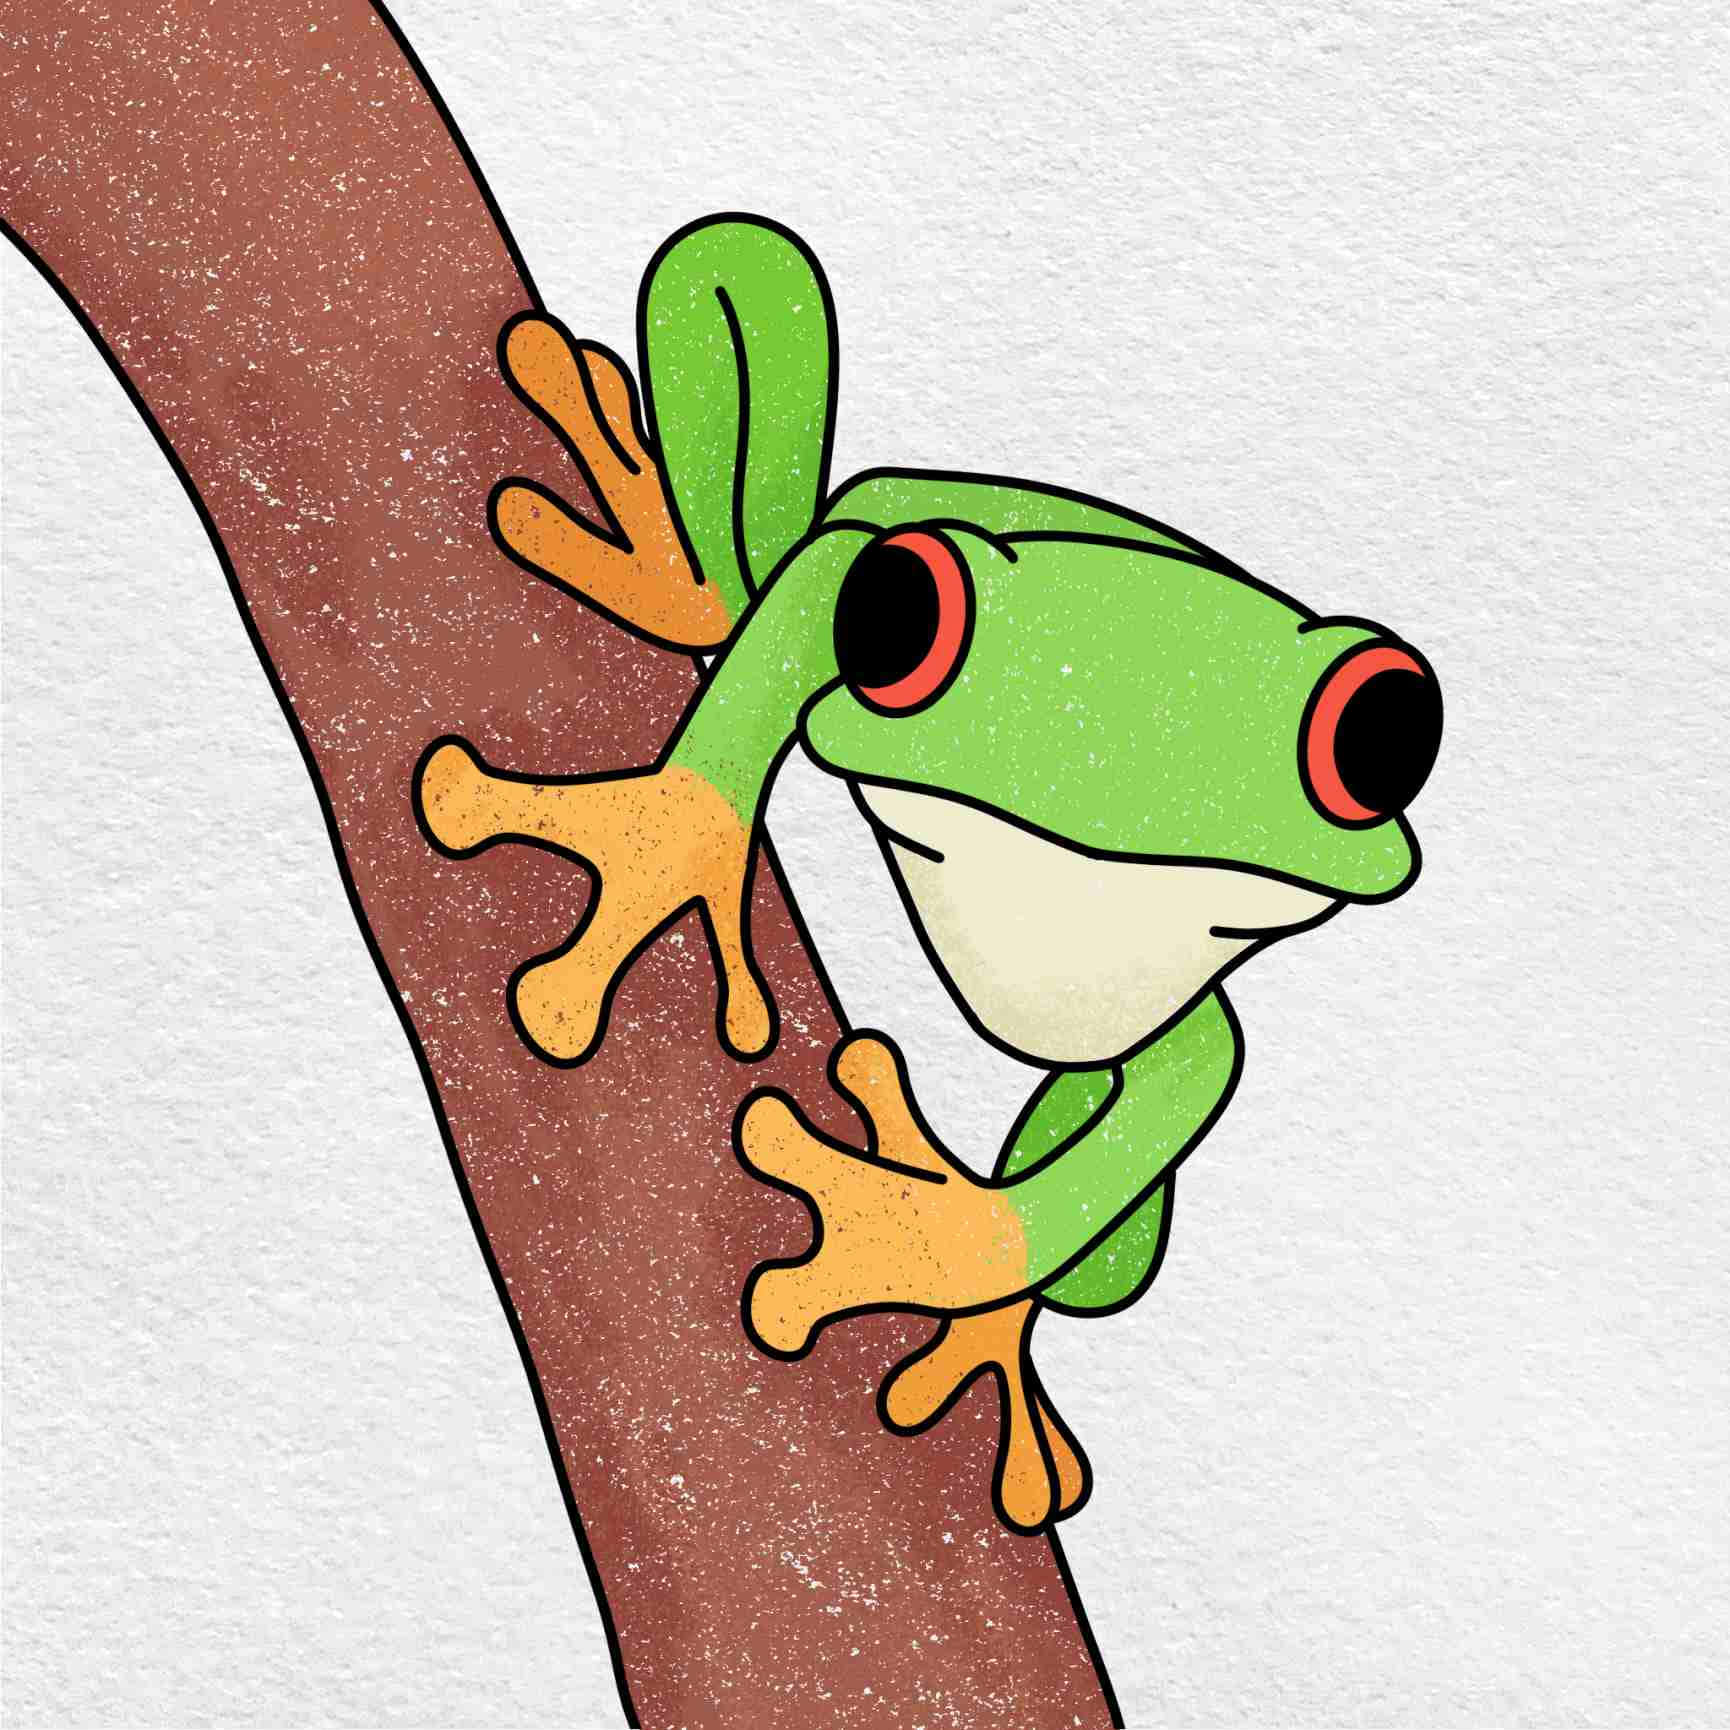 A Detailed Drawing of a Frog